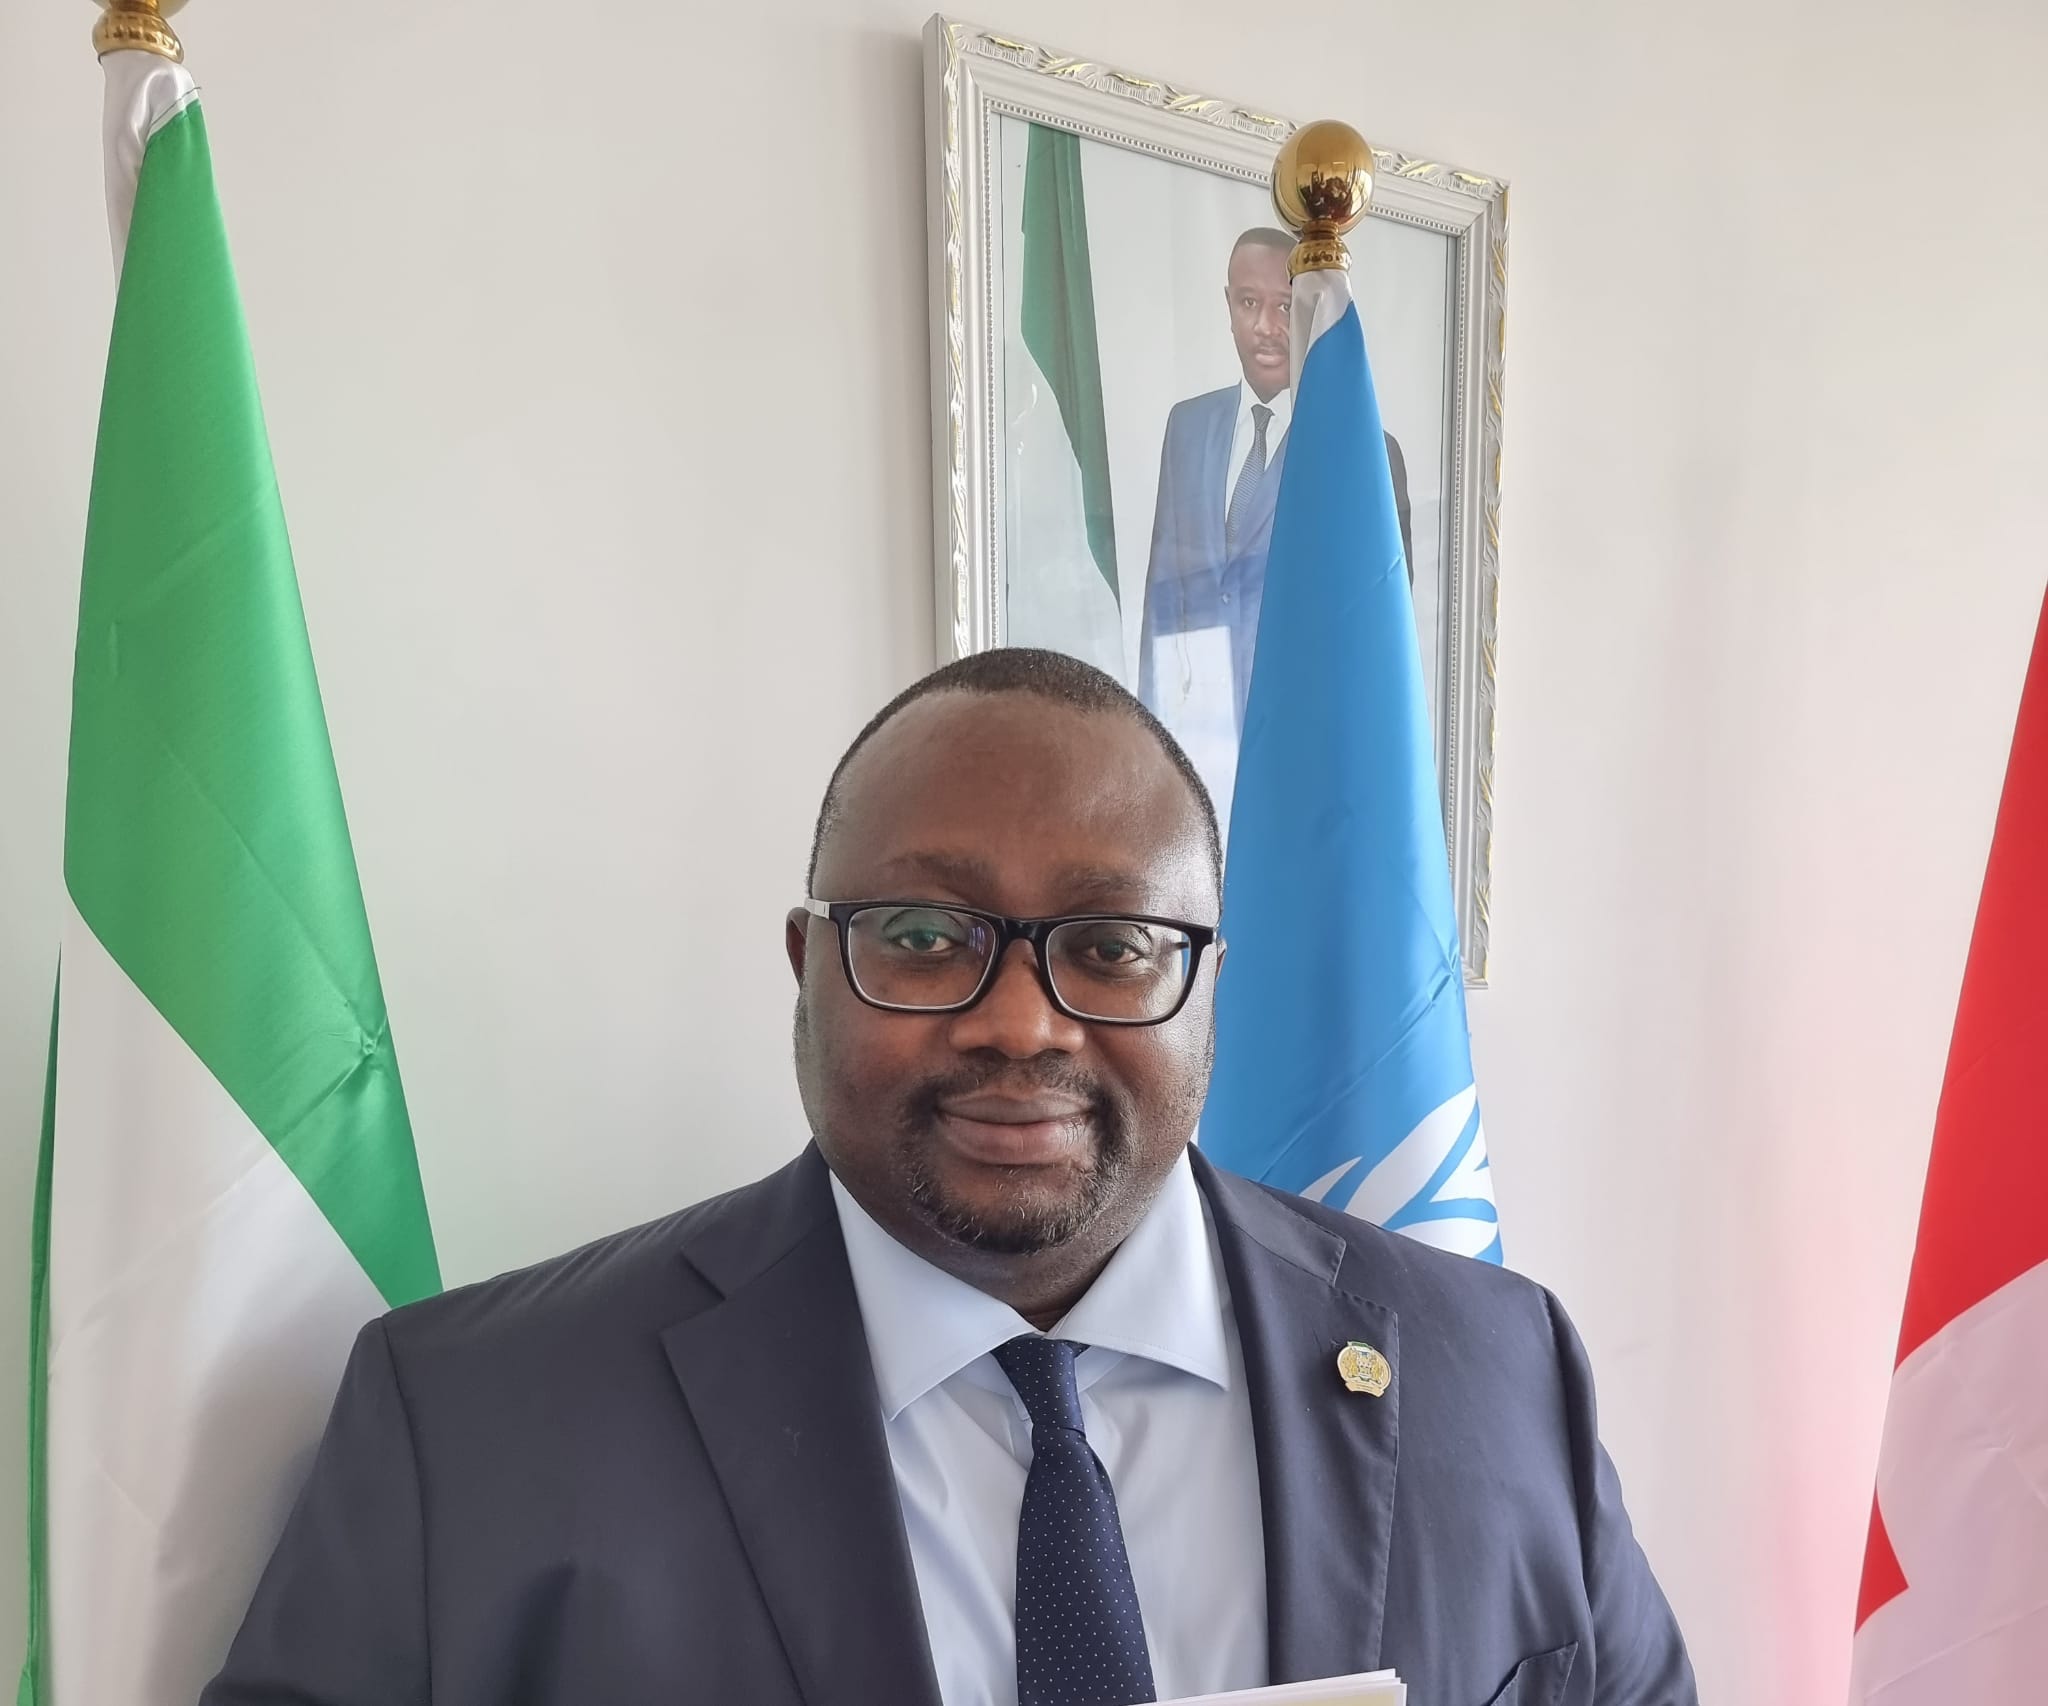 WTO Appoints Ambassador Lansana Gberie as New Chair of TRIPS